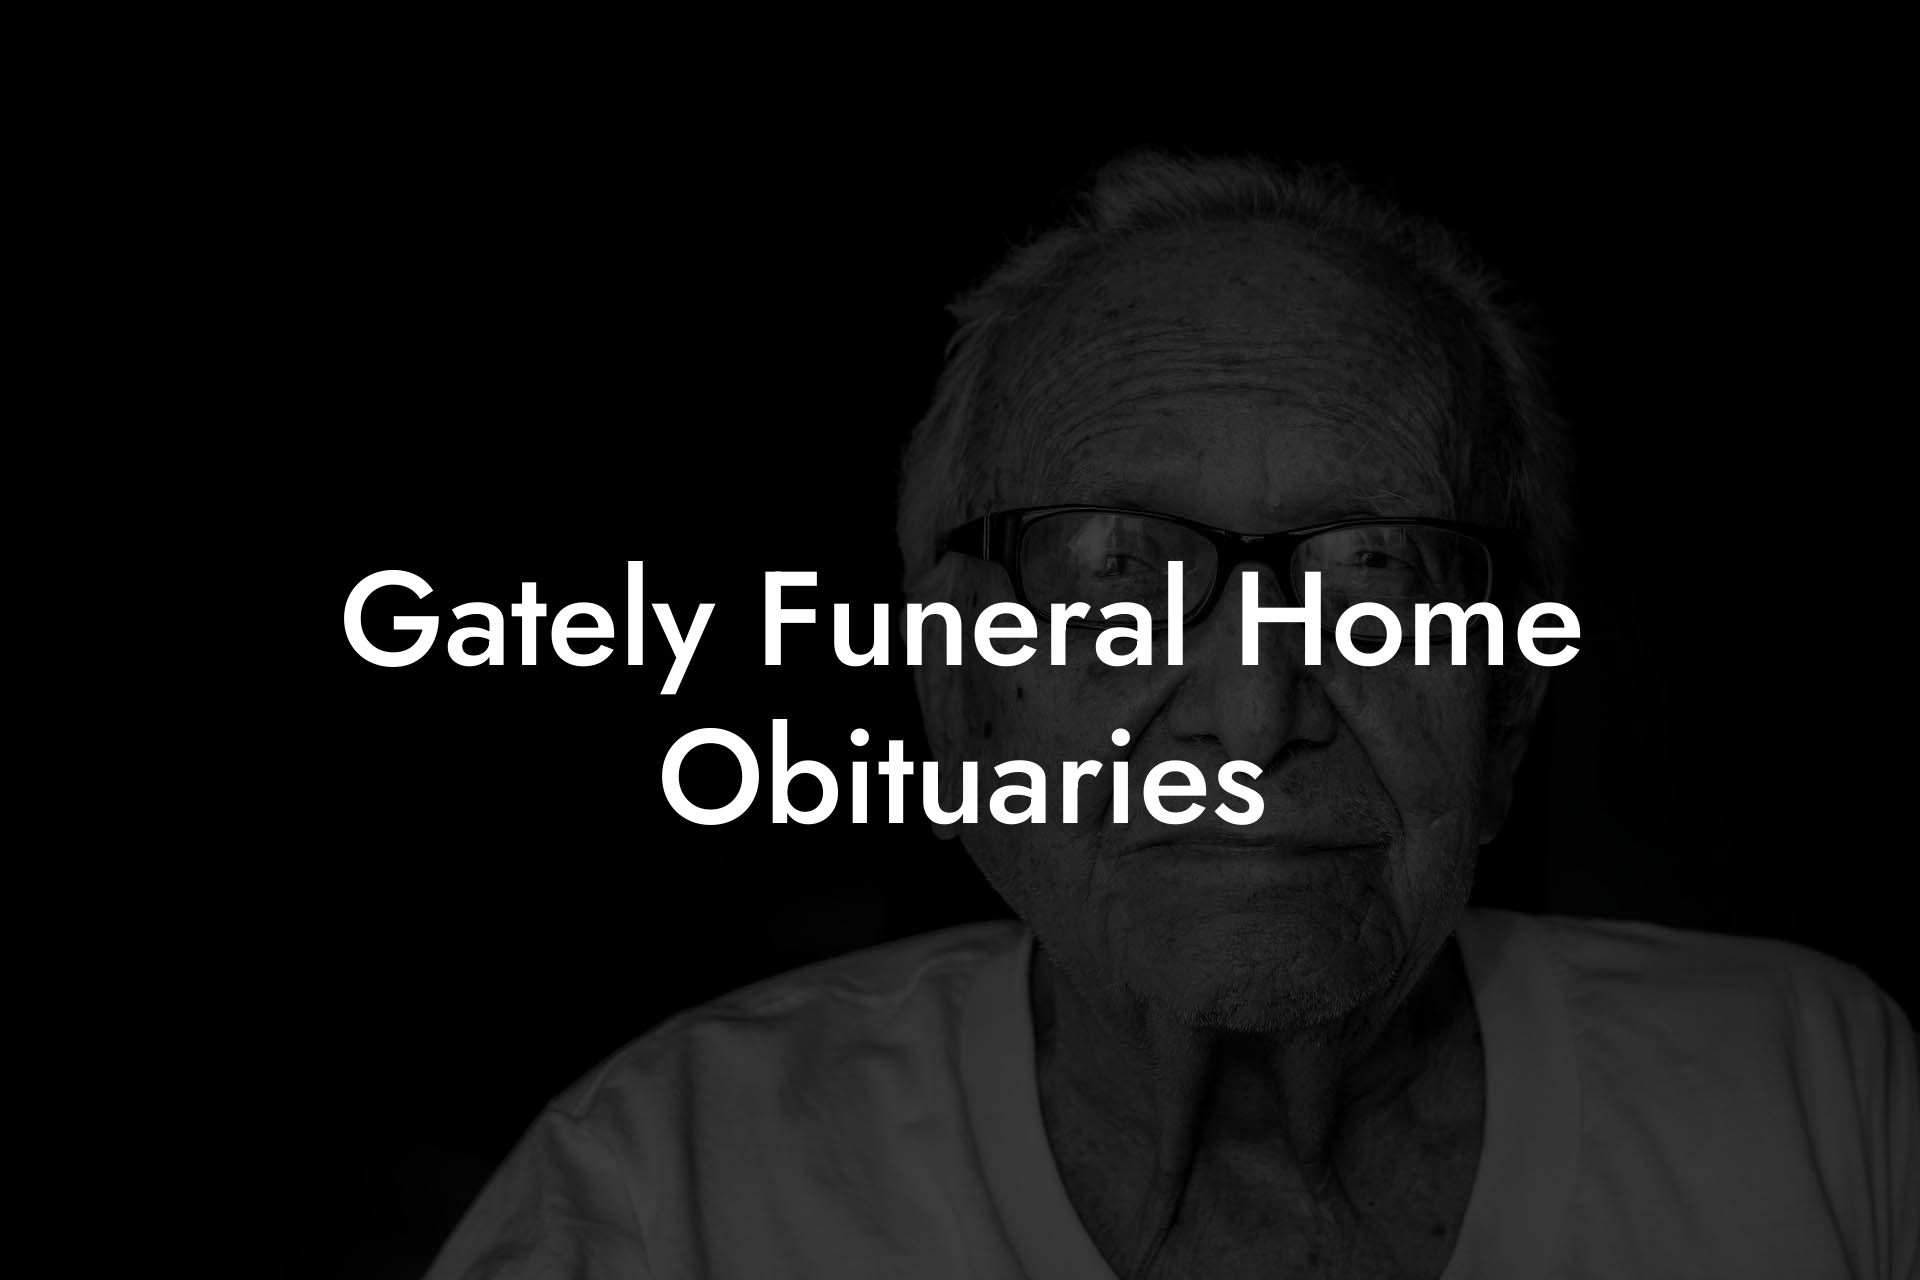 Gately Funeral Home Obituaries